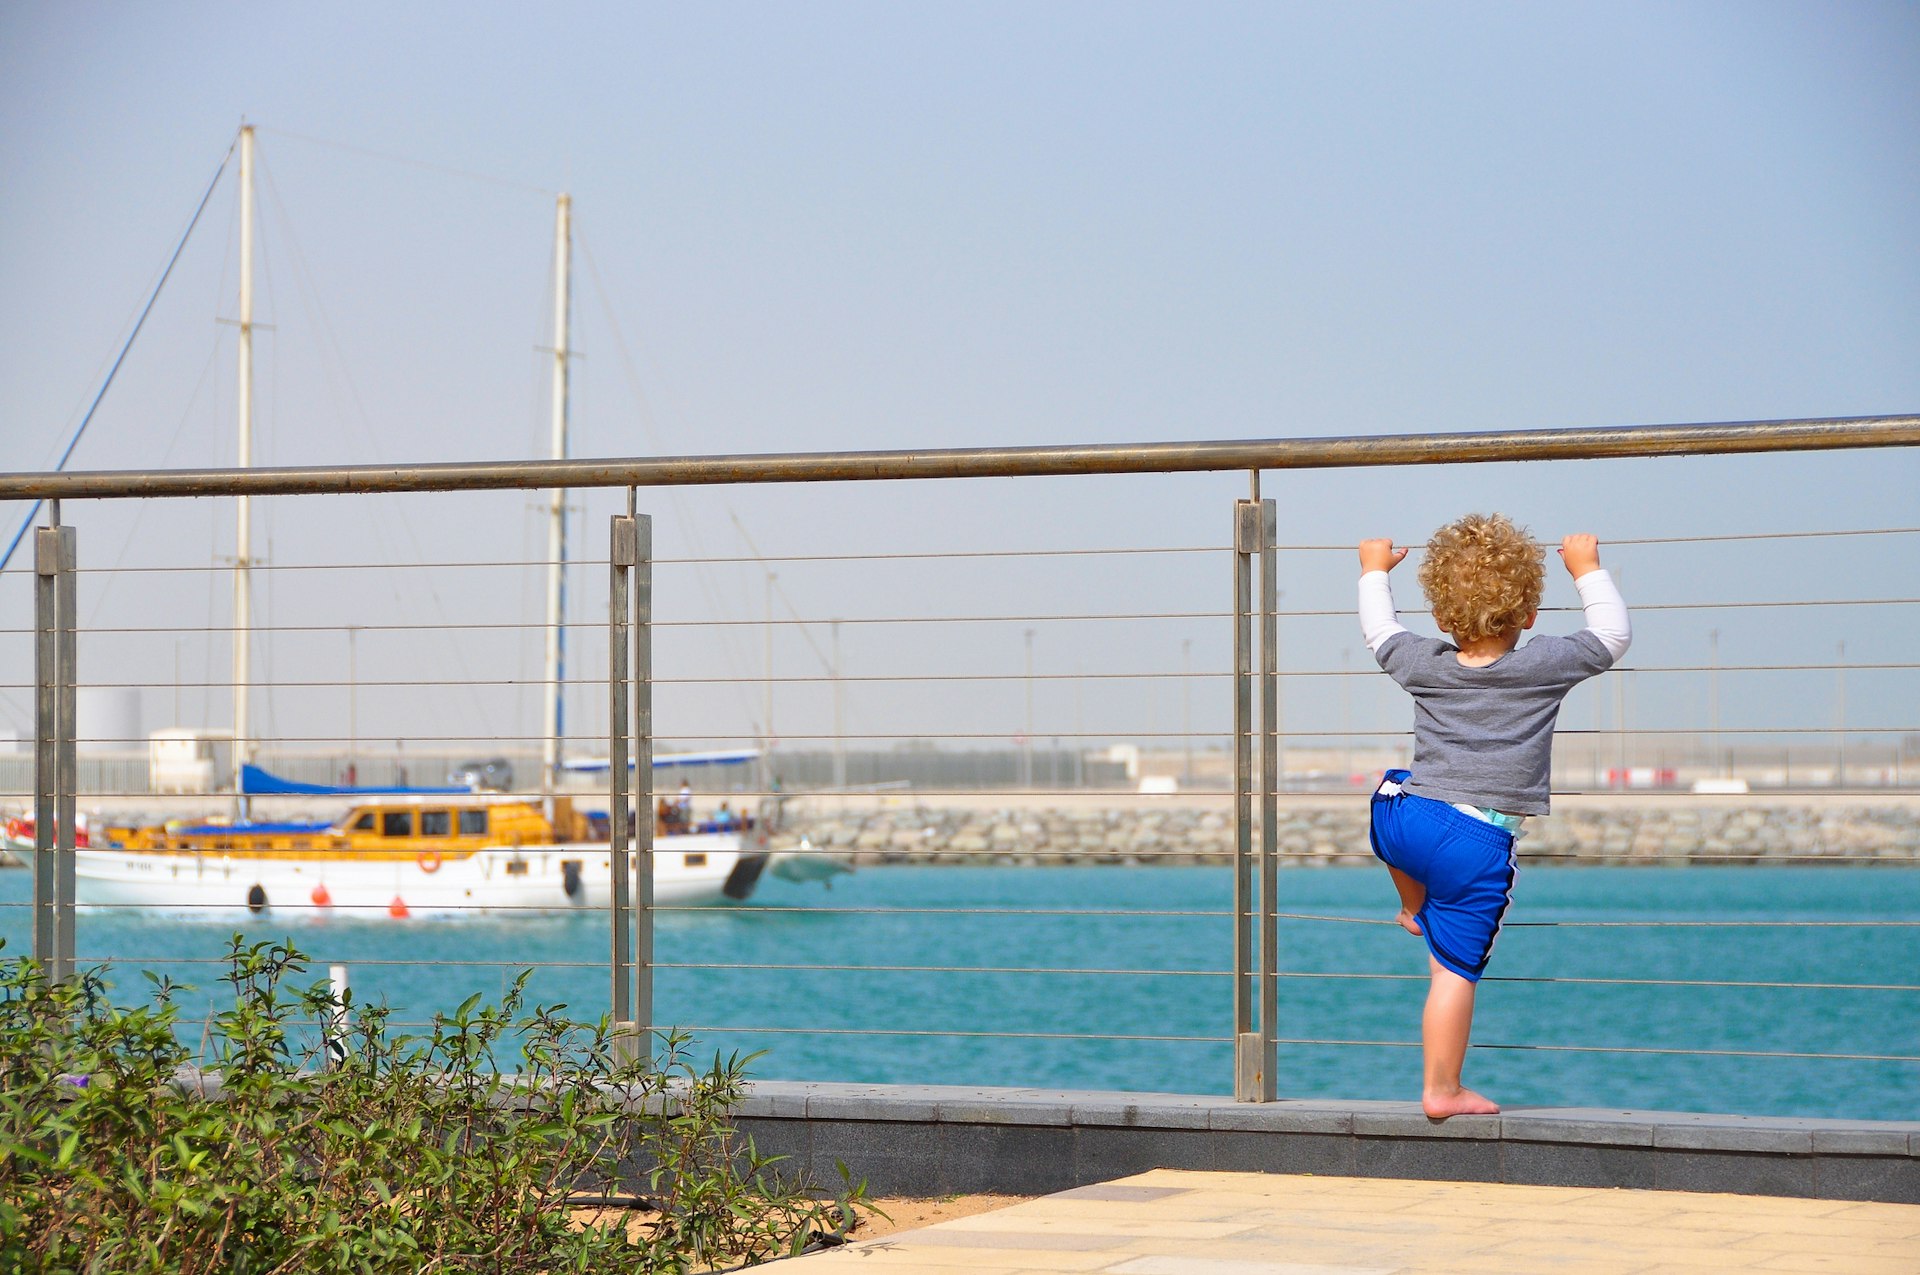 A young boy climbing the fence at Al Zeina residential complex, Abu Dhabi, overlooking the channel that separates Yas Island.